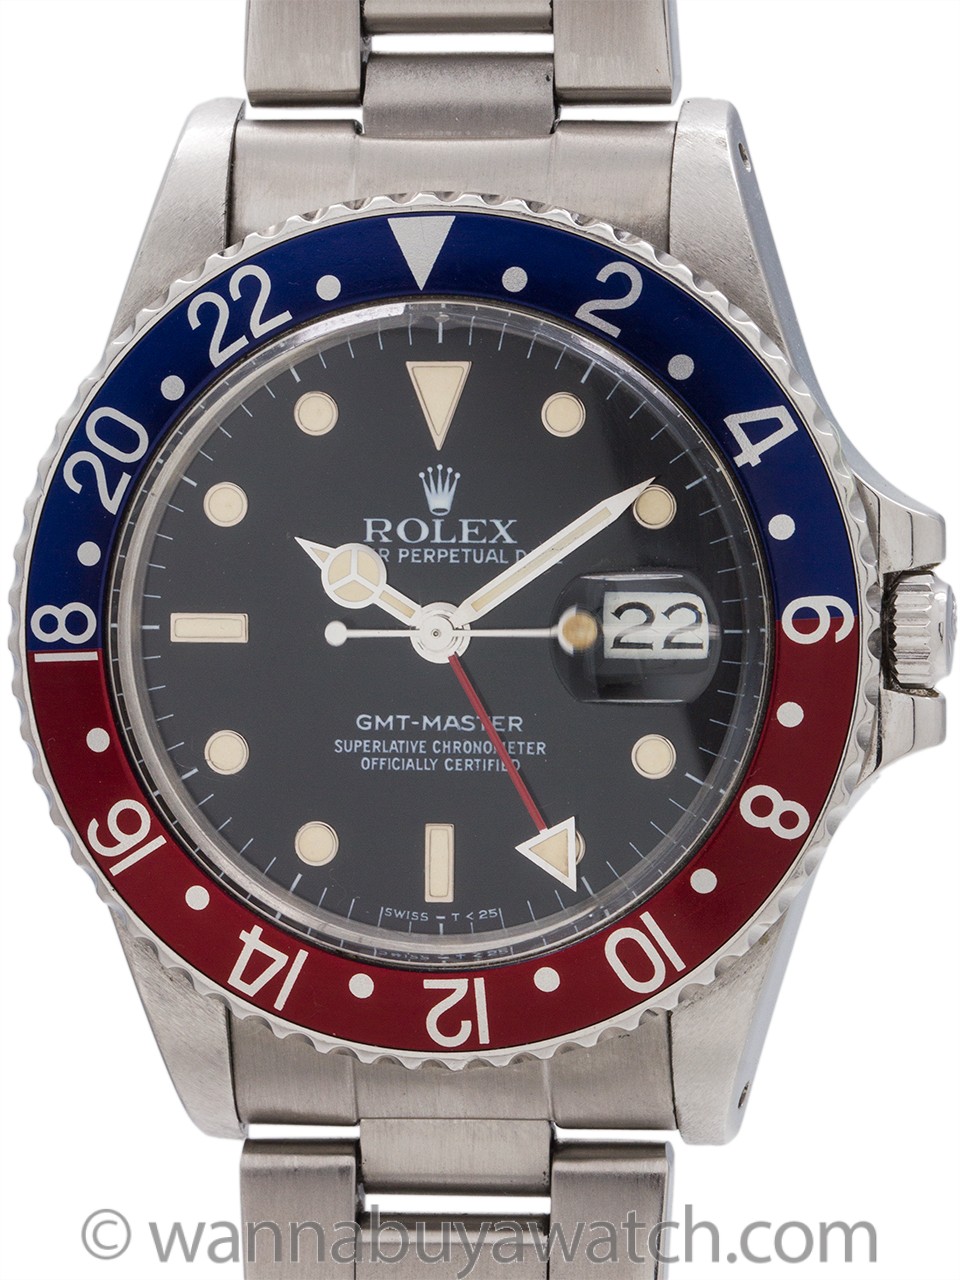 Rolex GMT Stainless Steel ref 16750 Transitional Model circa 1985